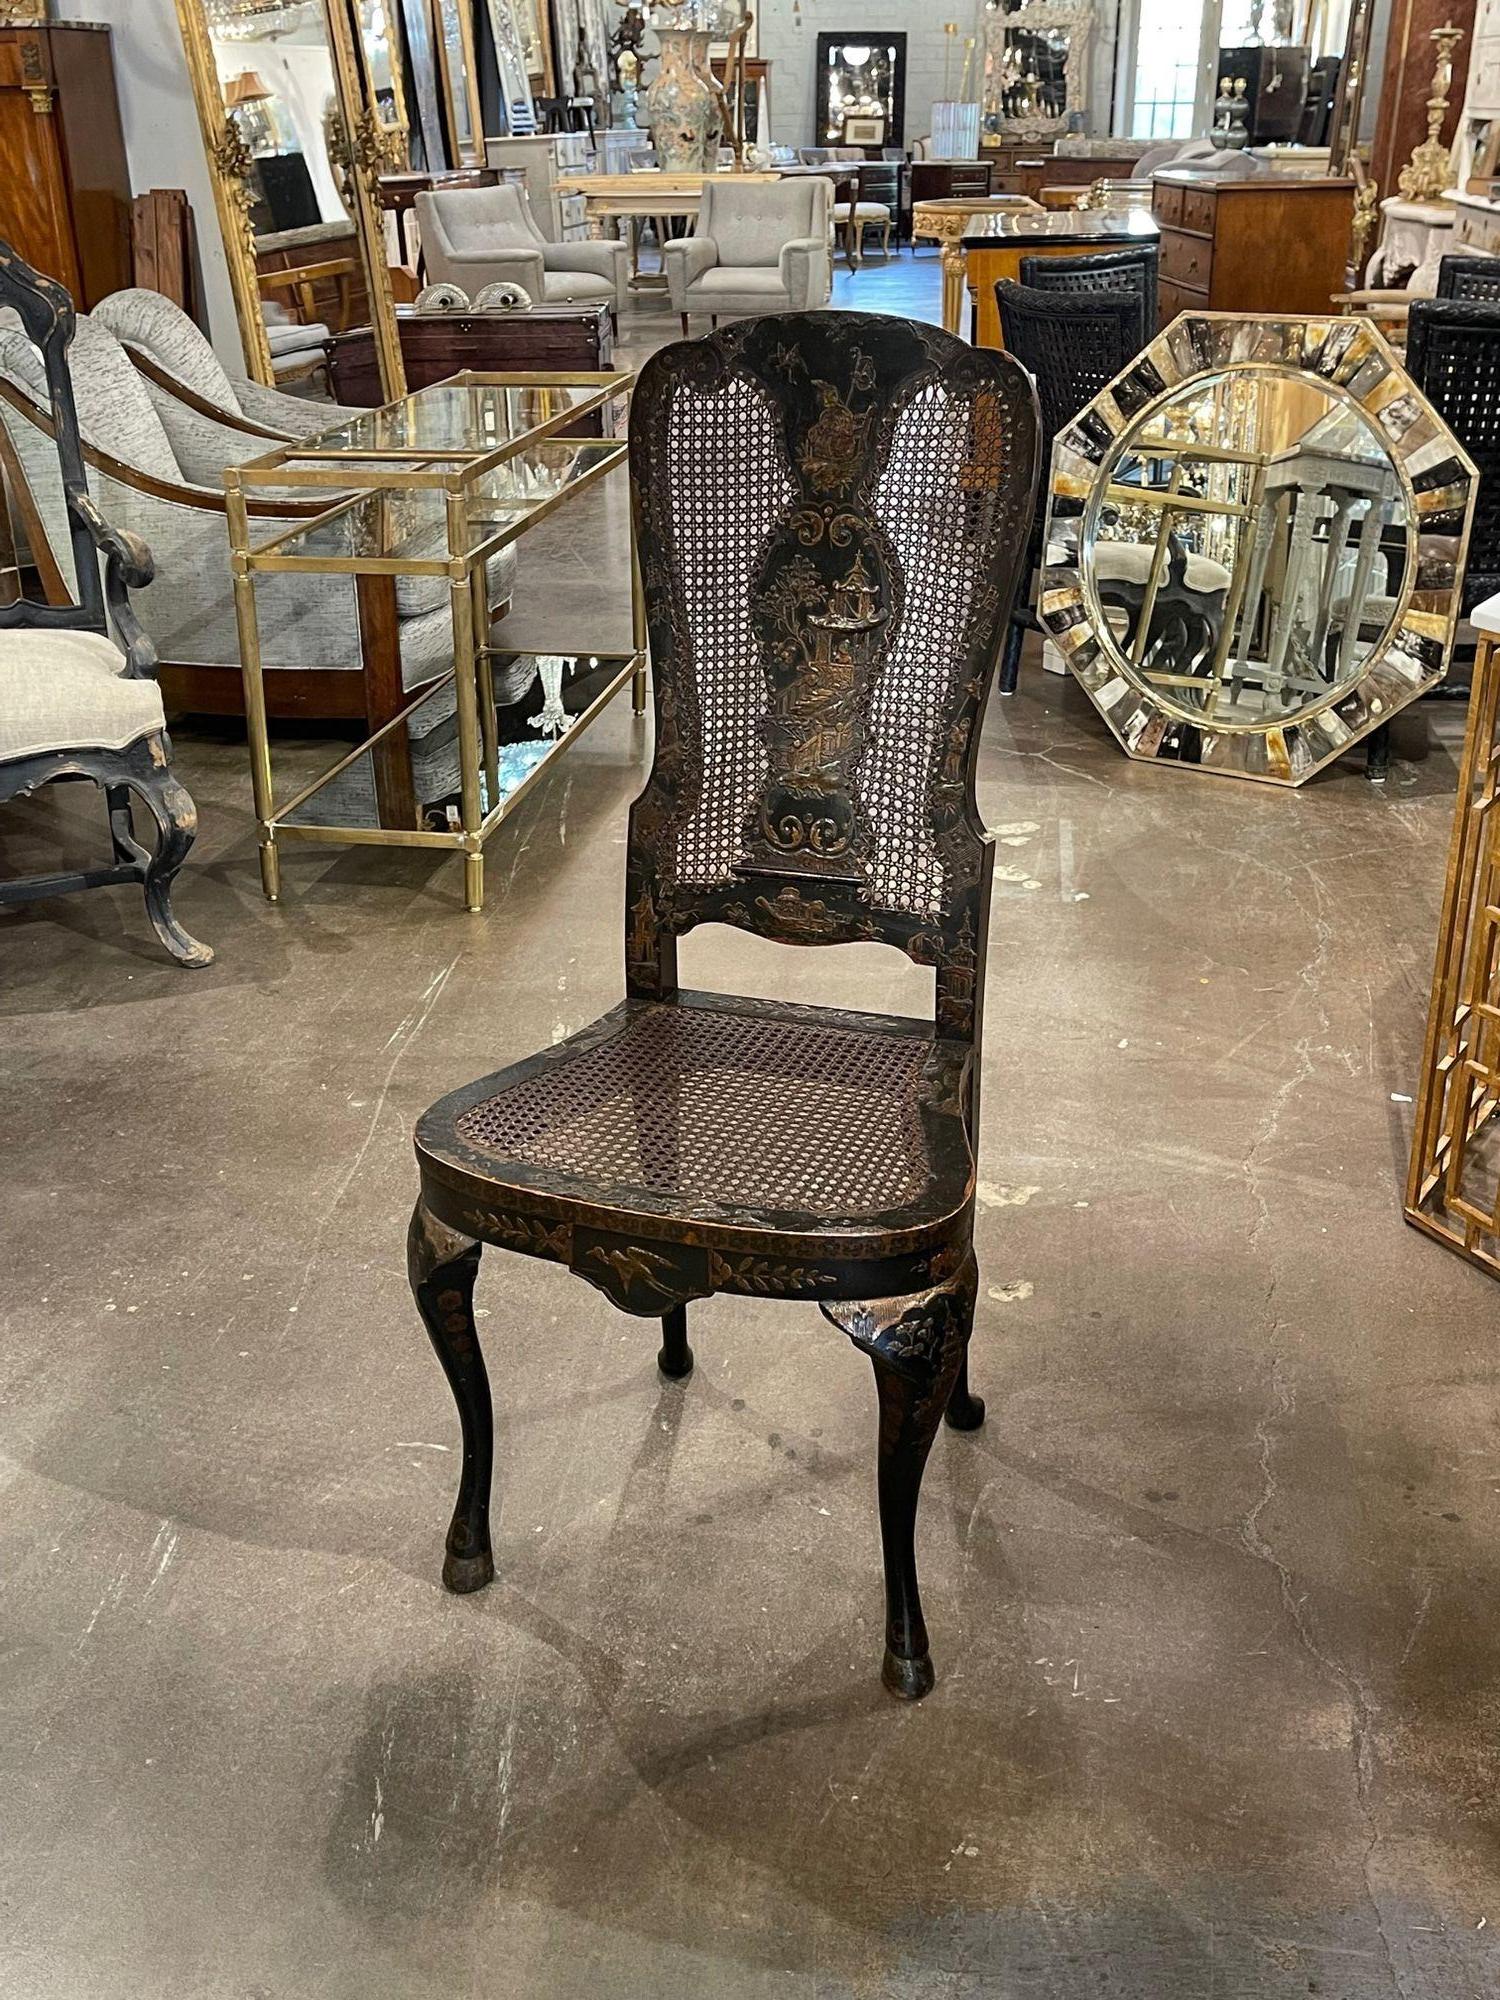 Good 18th century English Queen Anne chinoiserie side chair. Circa 1790. A timeless and classic touch for a fine interior.